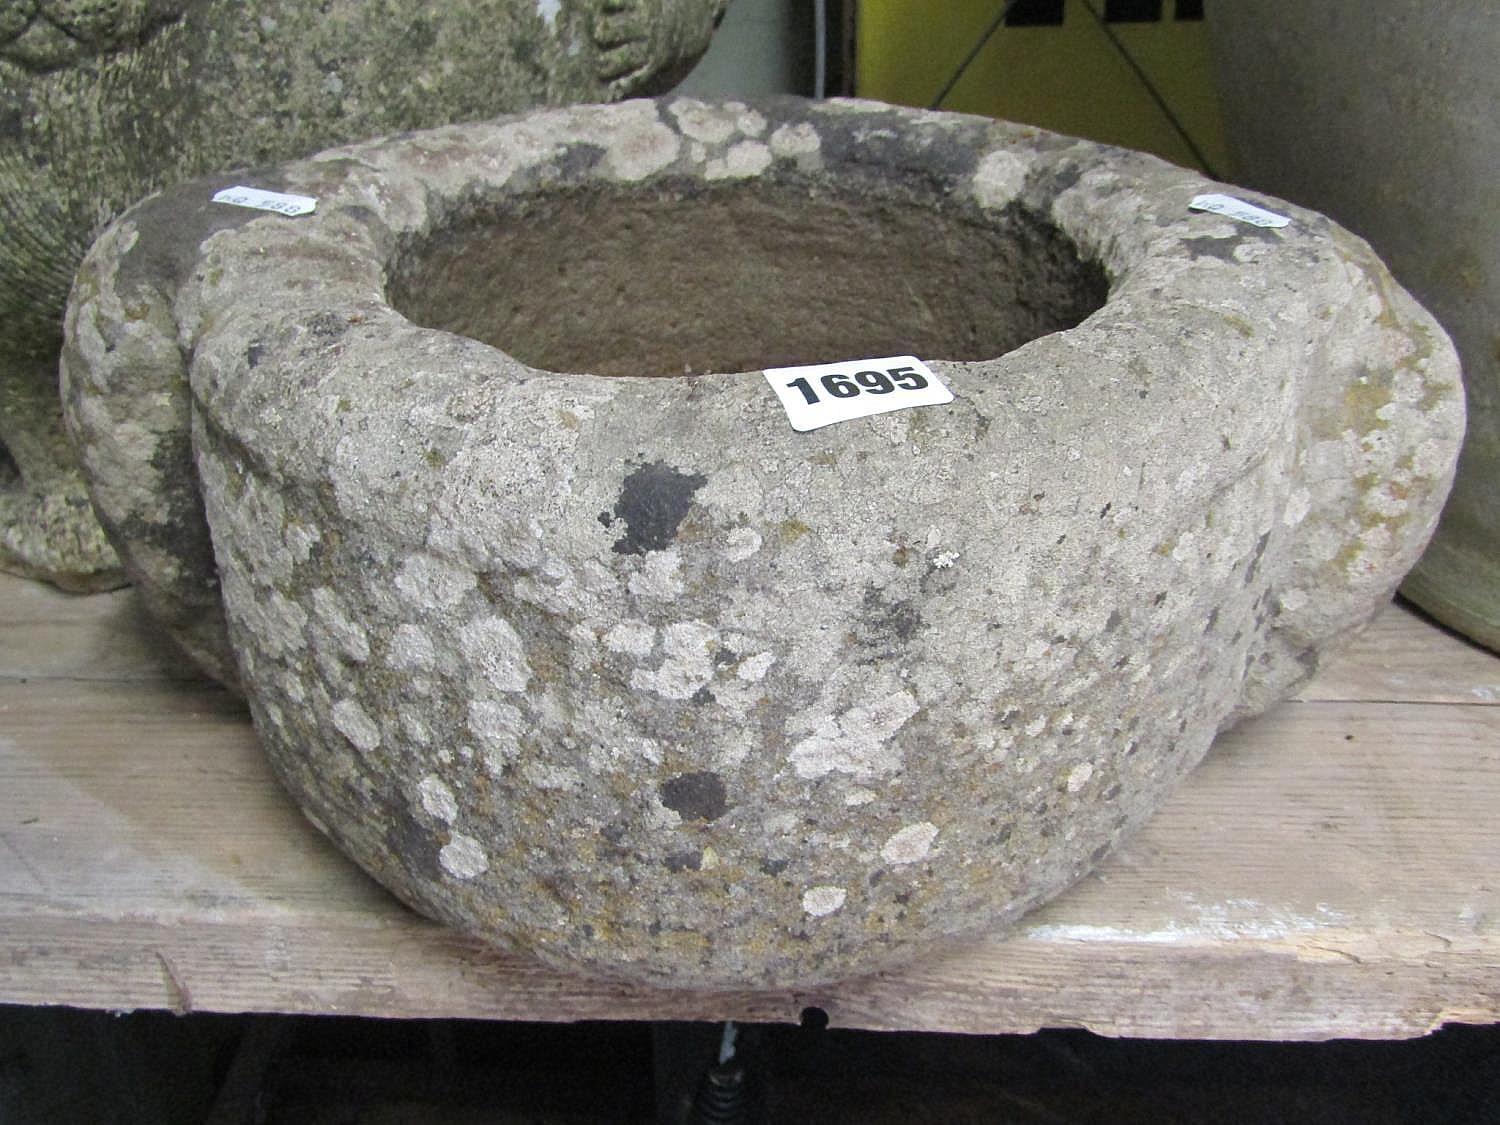 An old, possibly ancient, carved stone mortar with lug handles, 28 cm in diameter (excluding